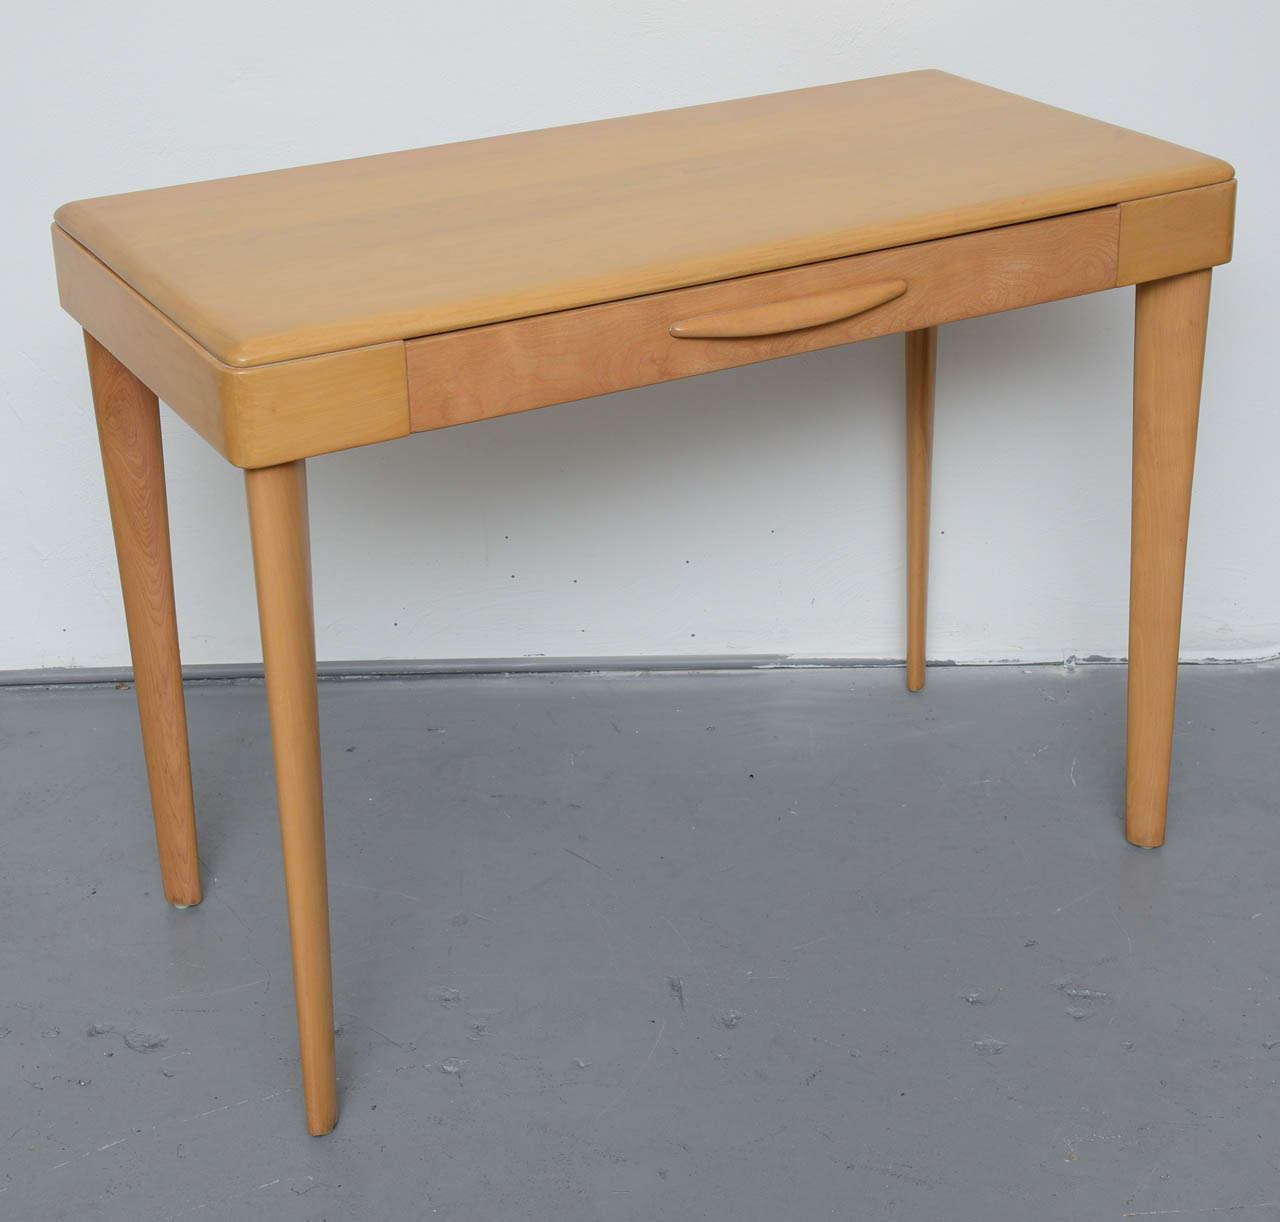 Mid-Century Modern Heywood Wakefield Maple Desk 1960s--Chair sold Desk comes solo